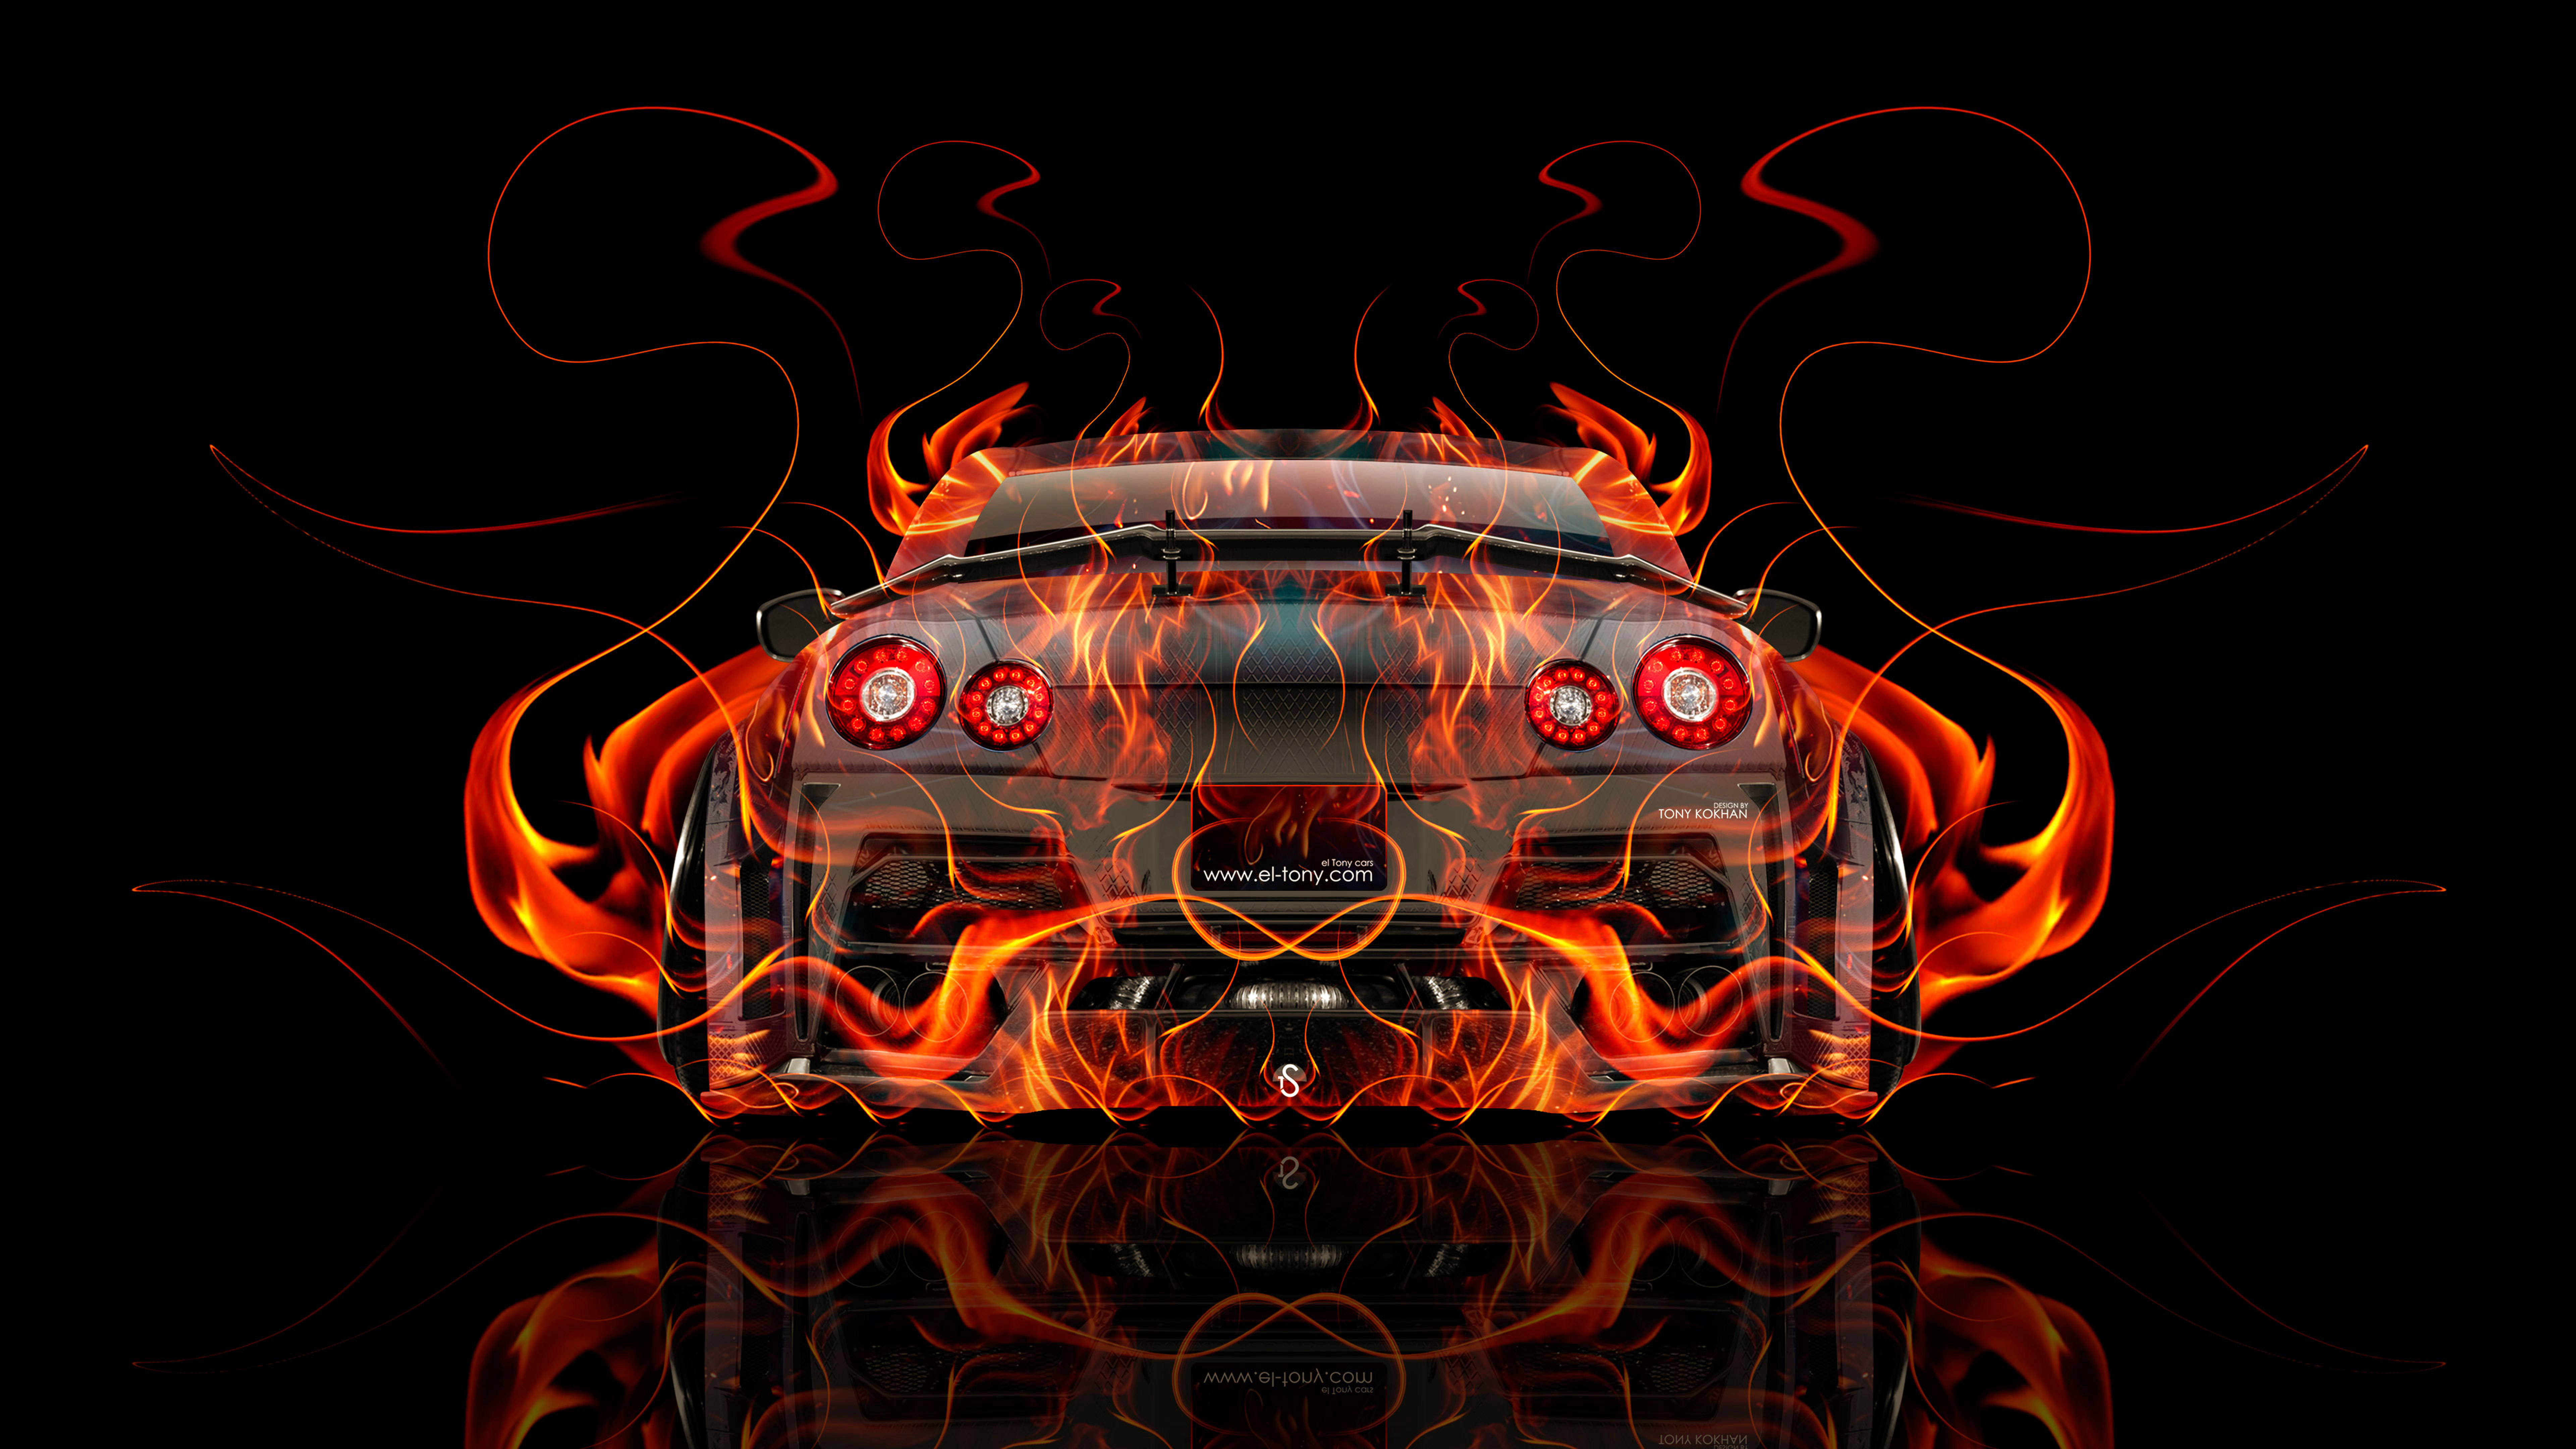 Nissan-GTR-R35-Kuhl-Tuning-Back-Super-Fire-Flame-Abstract-Art-Car